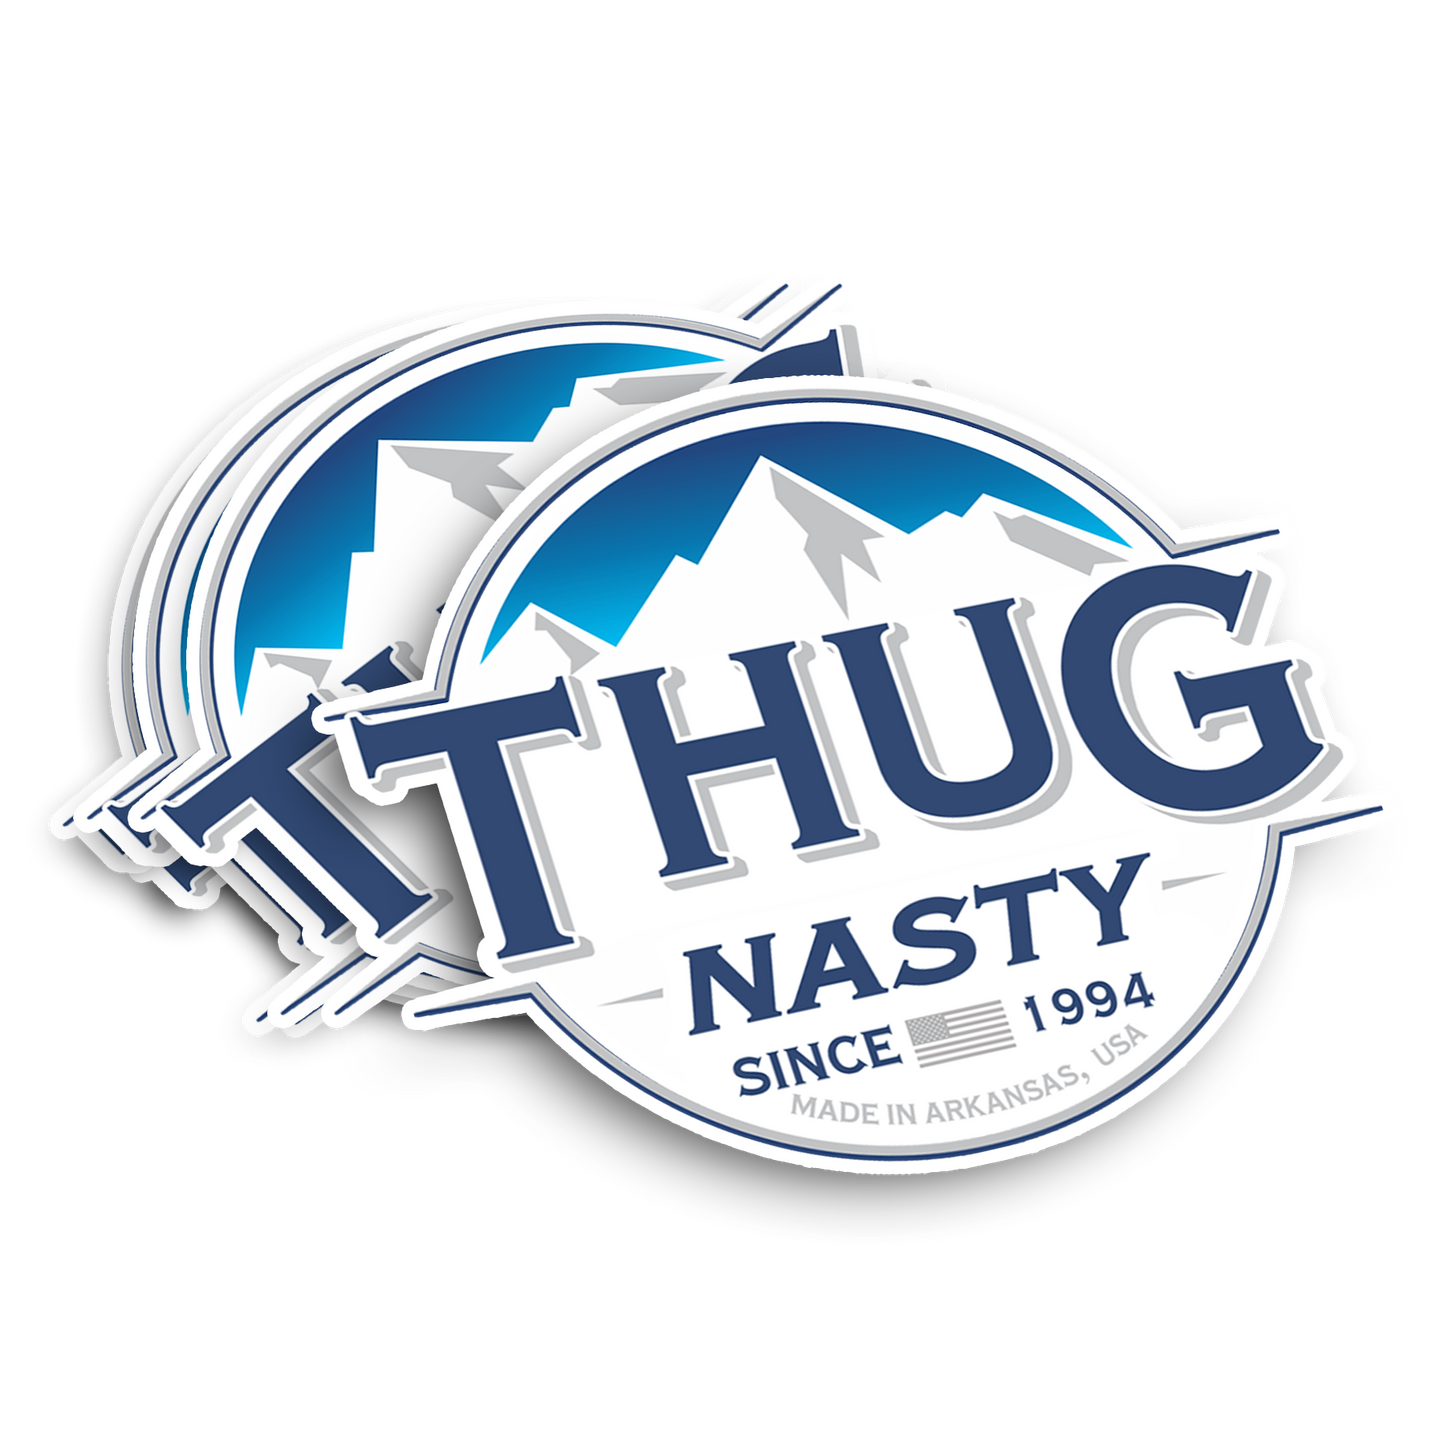 ThugNasty Mountains Decal